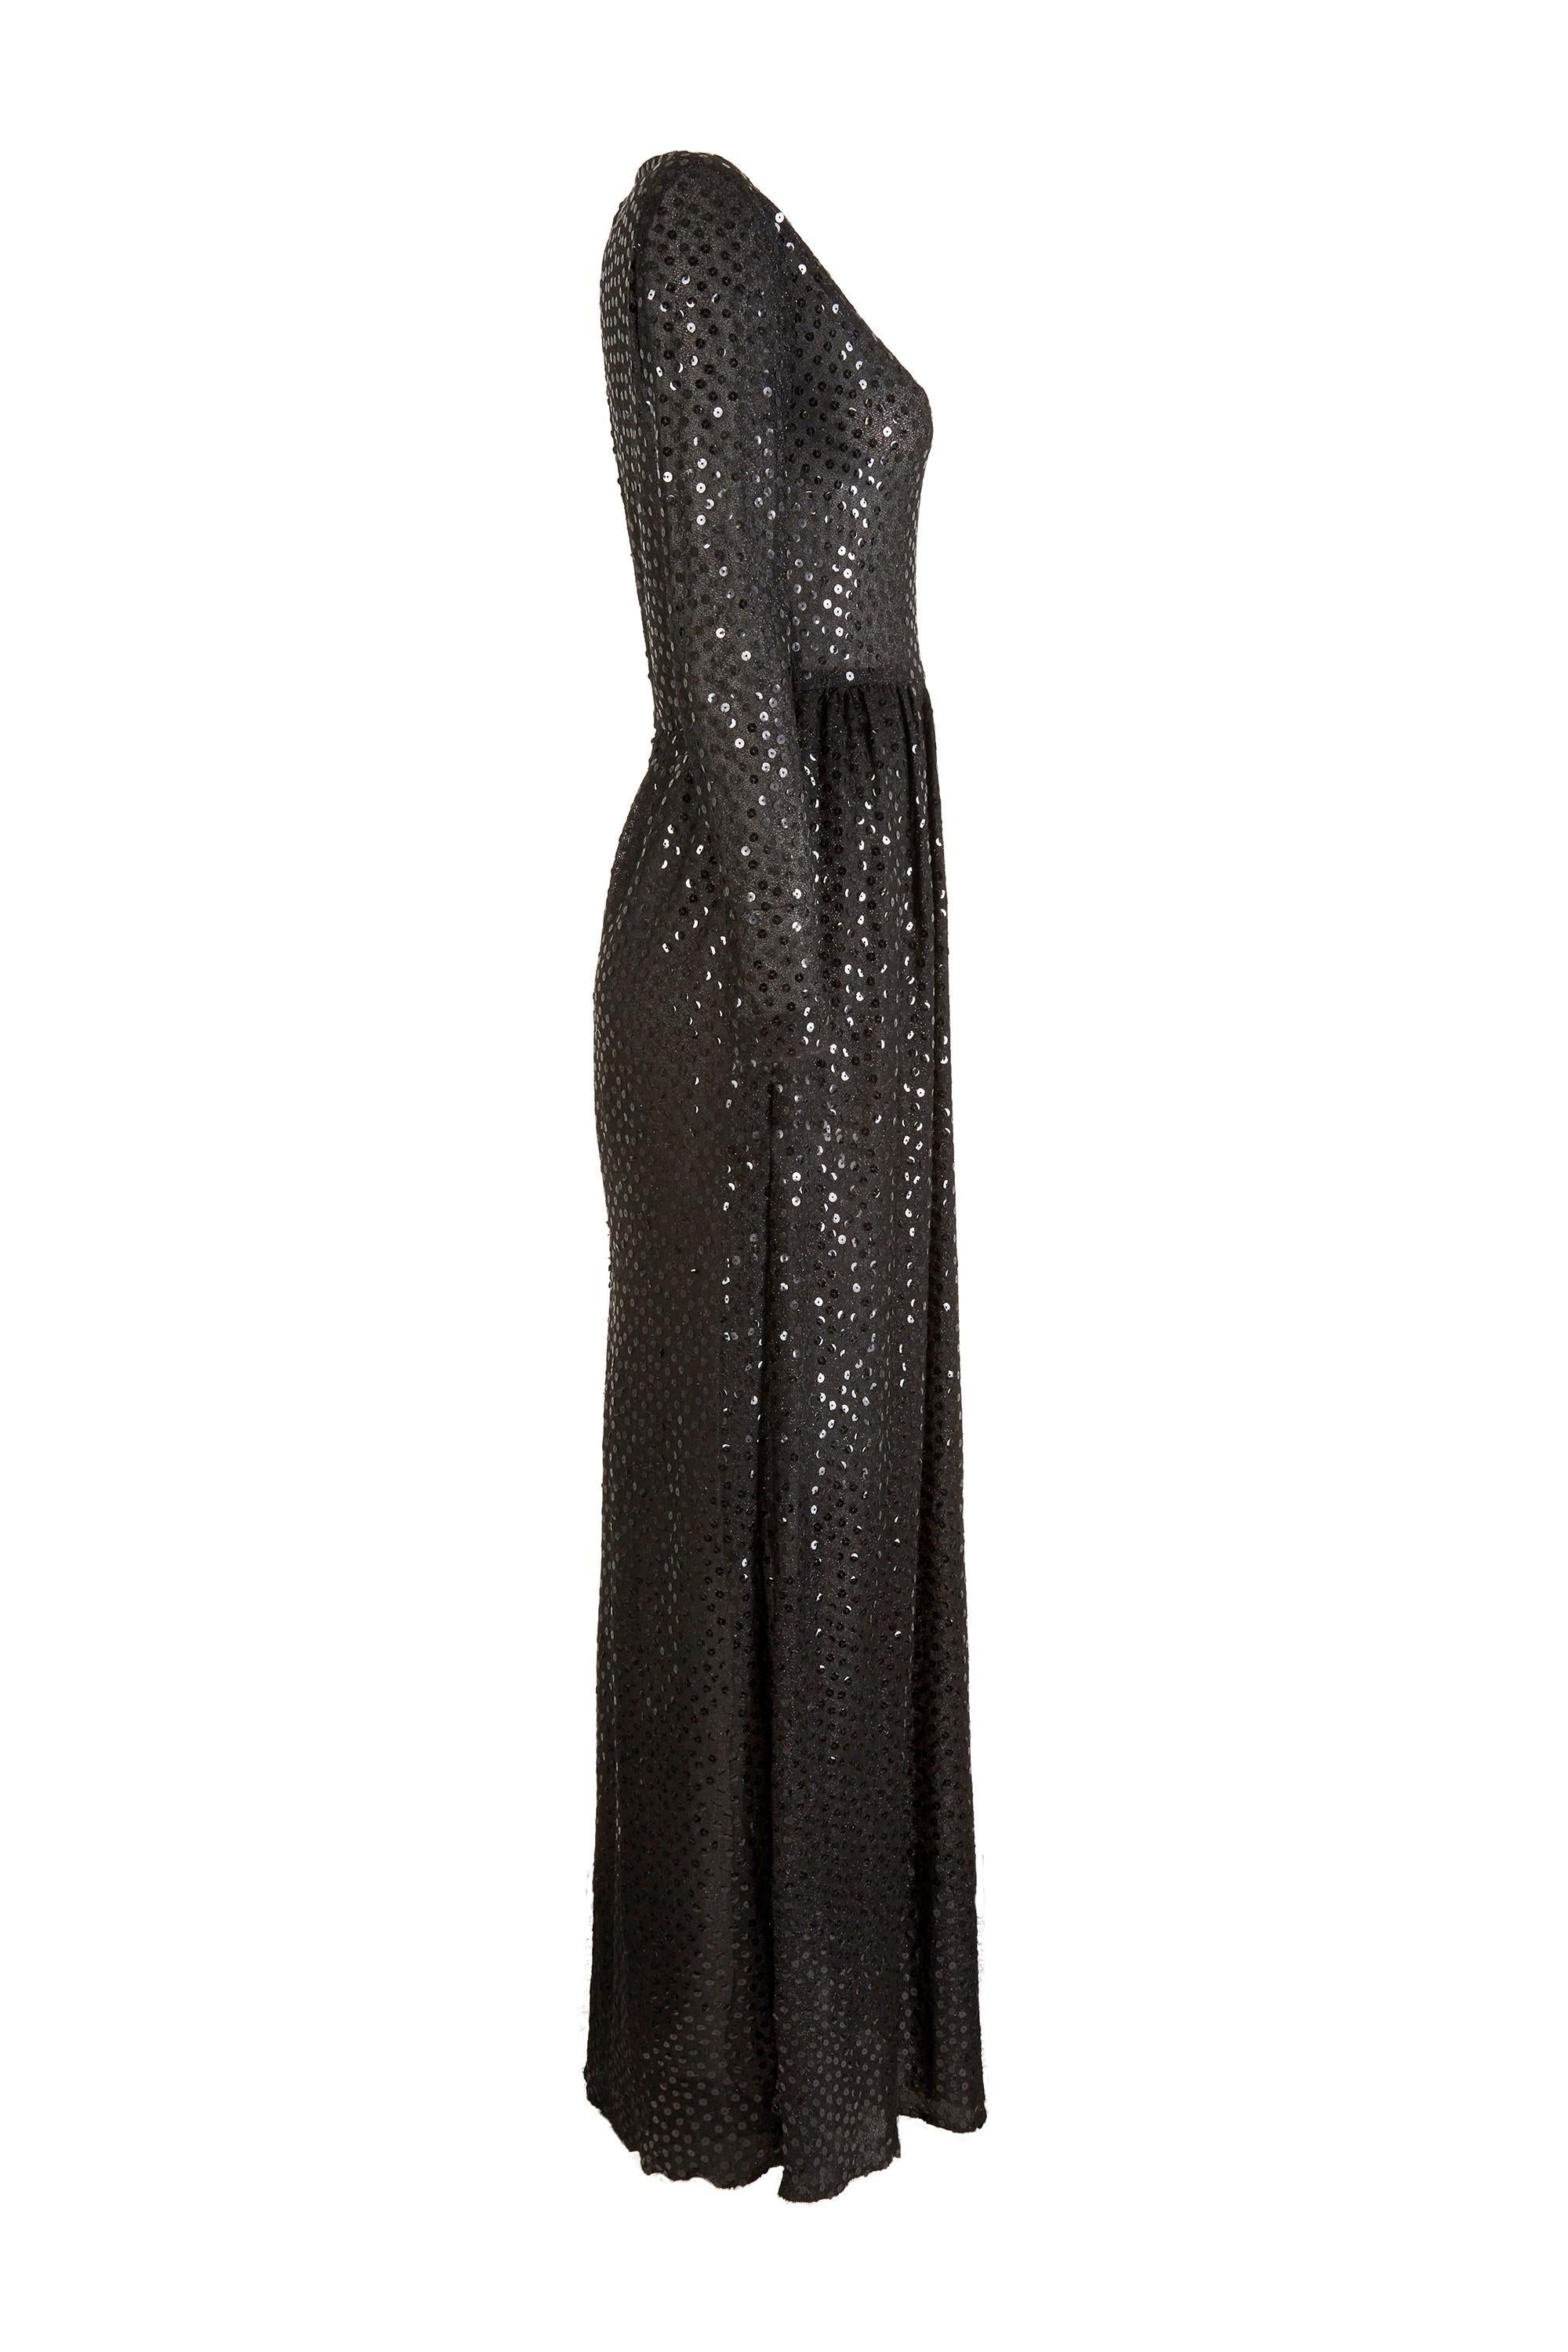 This sensational 1970s black sequinned evening gown is by Morty Sussman for Mollie Parnis Boutique and is in truly excellent vintage condition. The dress is elegant, with a modest V neckline, long sleeves and a full length skirt. The sheer black